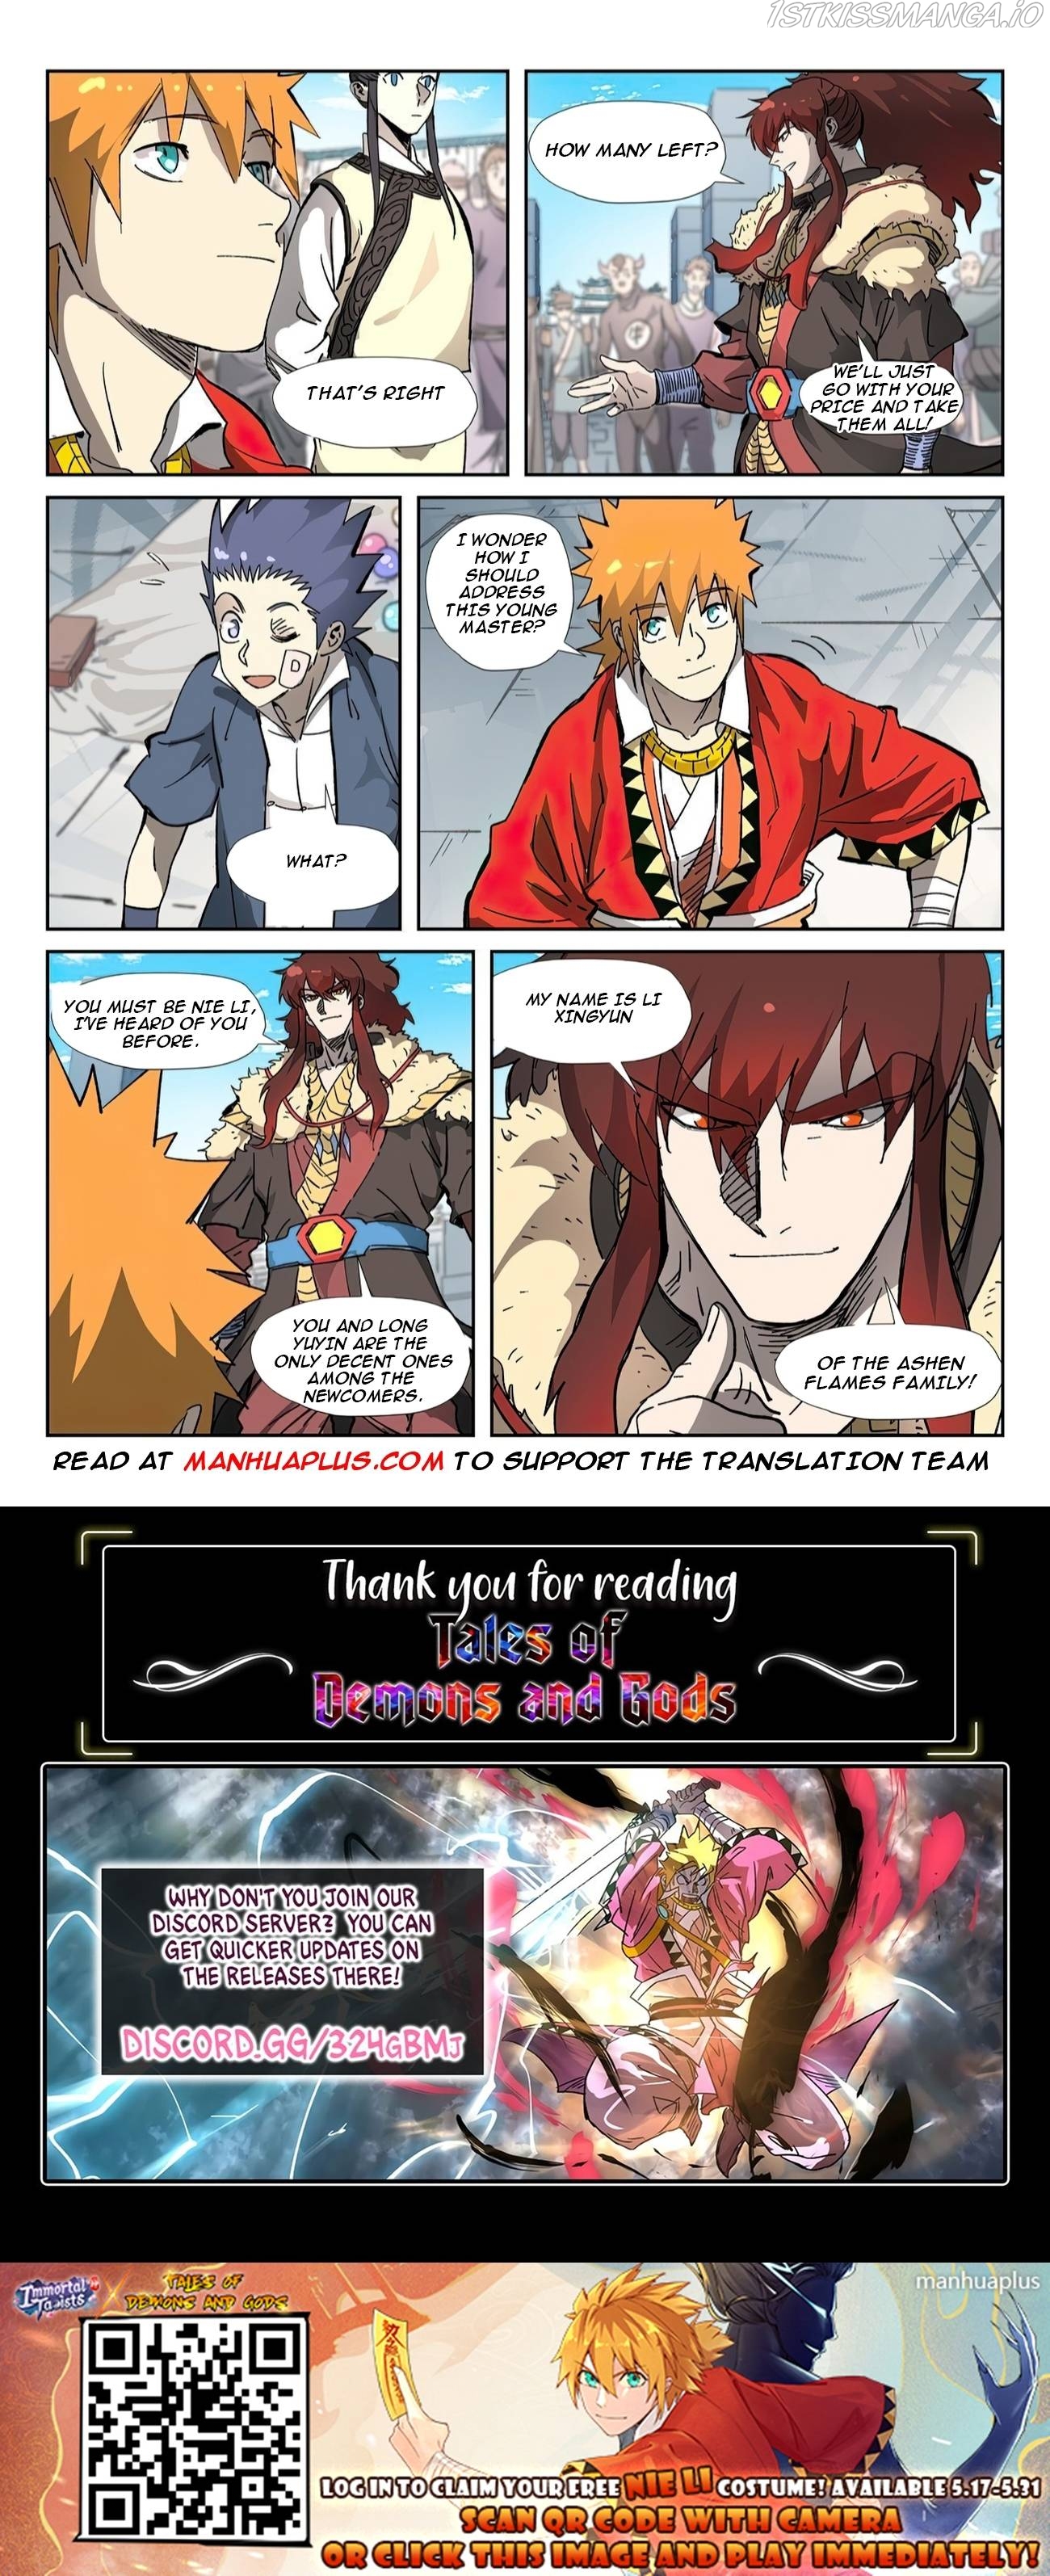 Tales of Demons and Gods Manhua Chapter 327.5 - Page 9